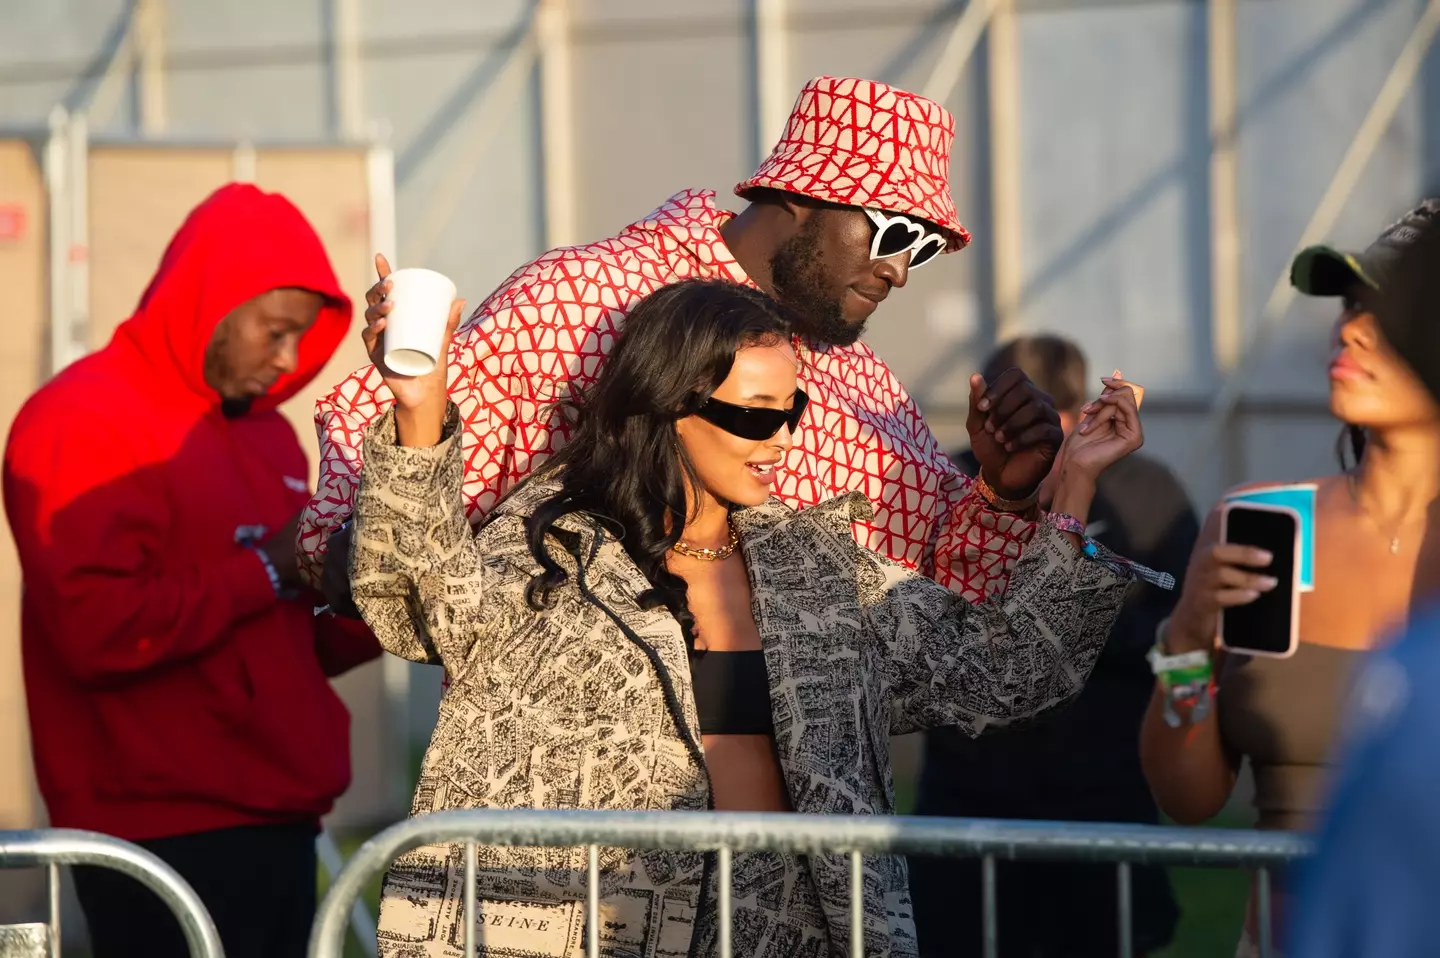 Maya Jama and Stormzy were among the celebs spotted at Glastonbury this year. (Joseph Okpako/WireImage/Getty Images)